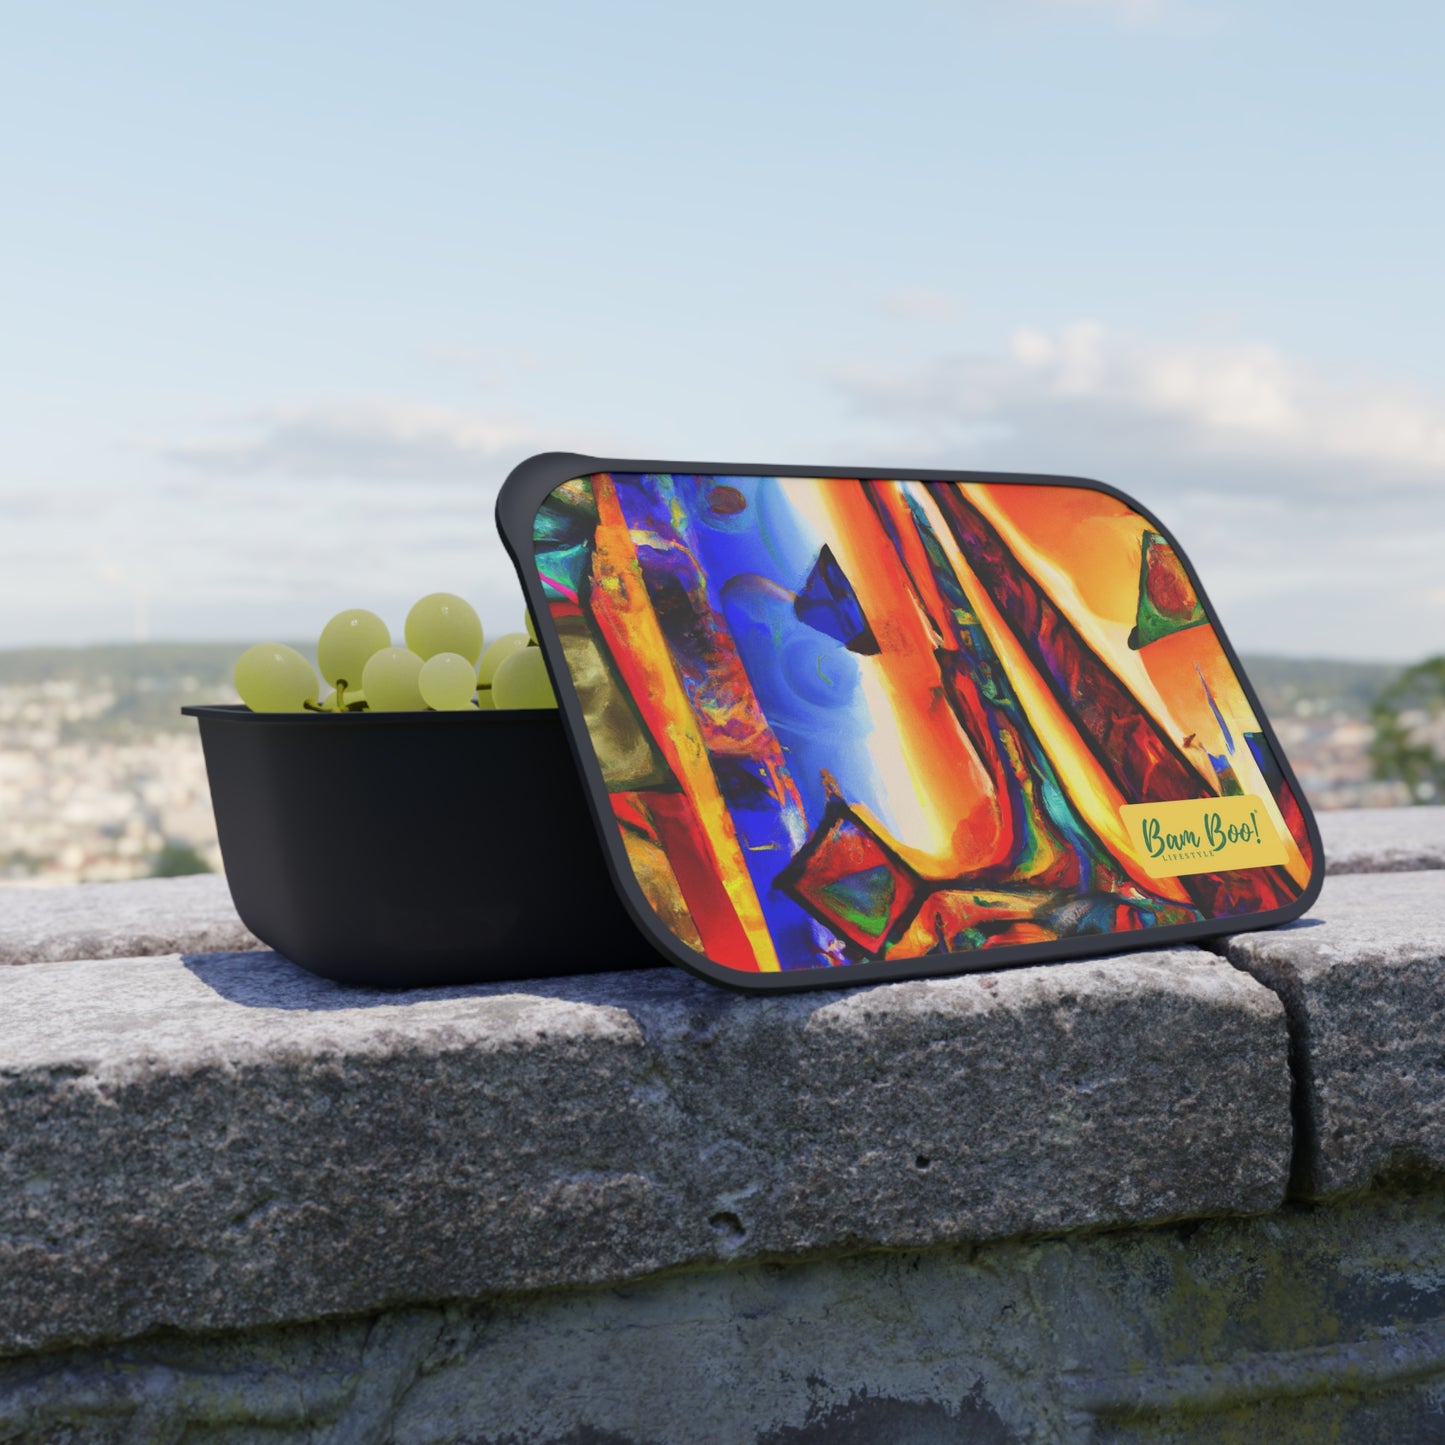 "Explorations in Artistic Hybridization" - Bam Boo! Lifestyle Eco-friendly PLA Bento Box with Band and Utensils